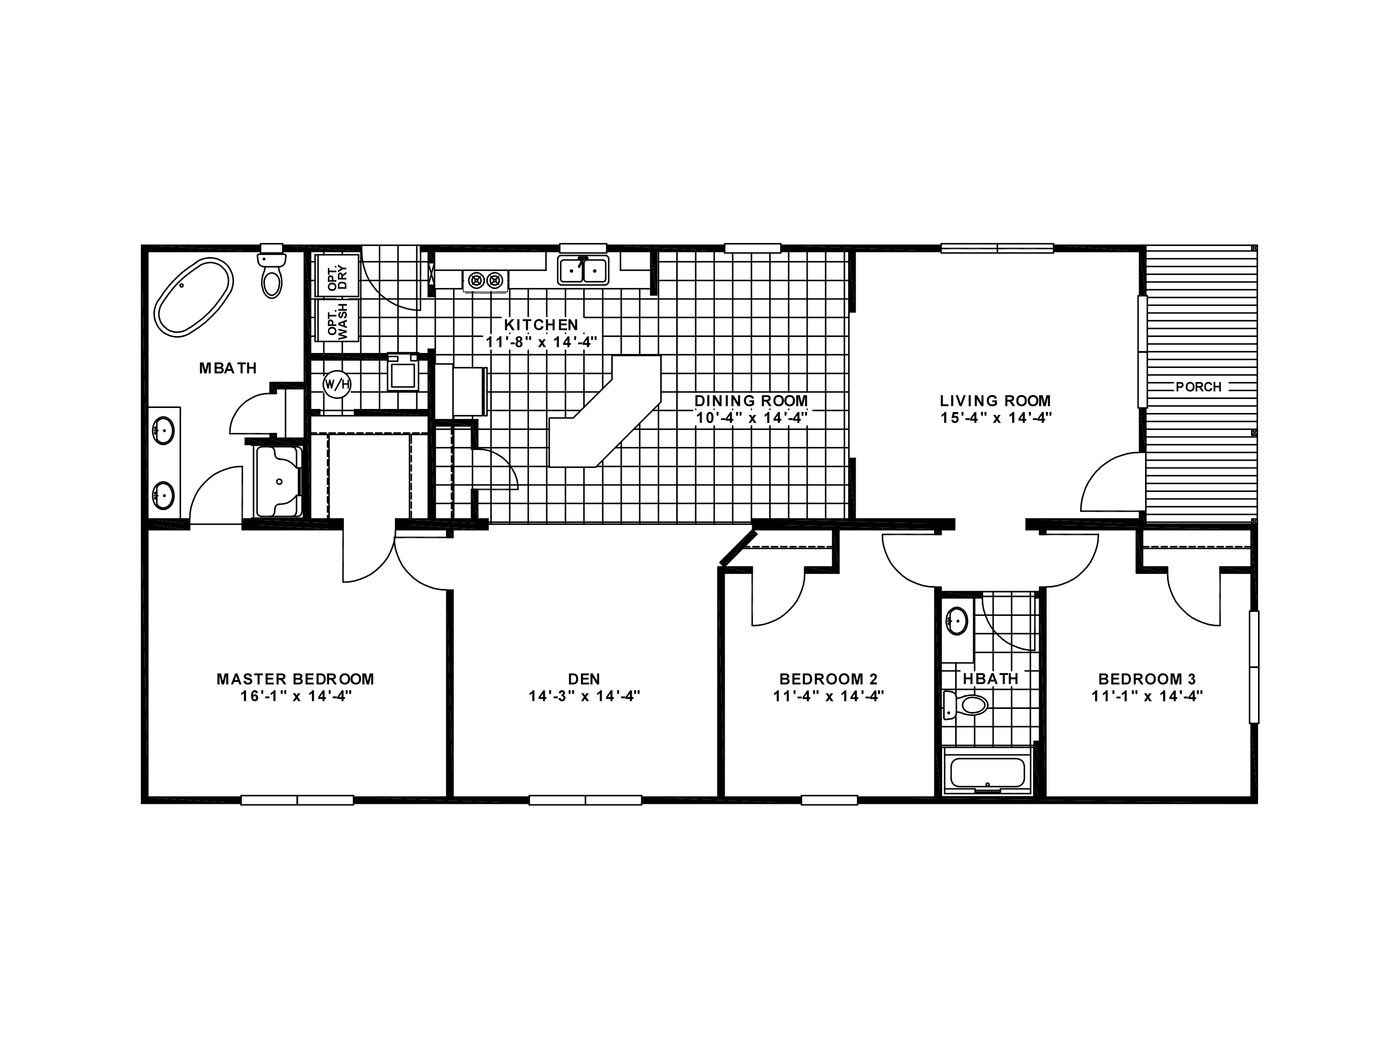 The THE RIDGE VIEW Floor Plan. This Manufactured Mobile Home features 3 bedrooms and 2 baths.